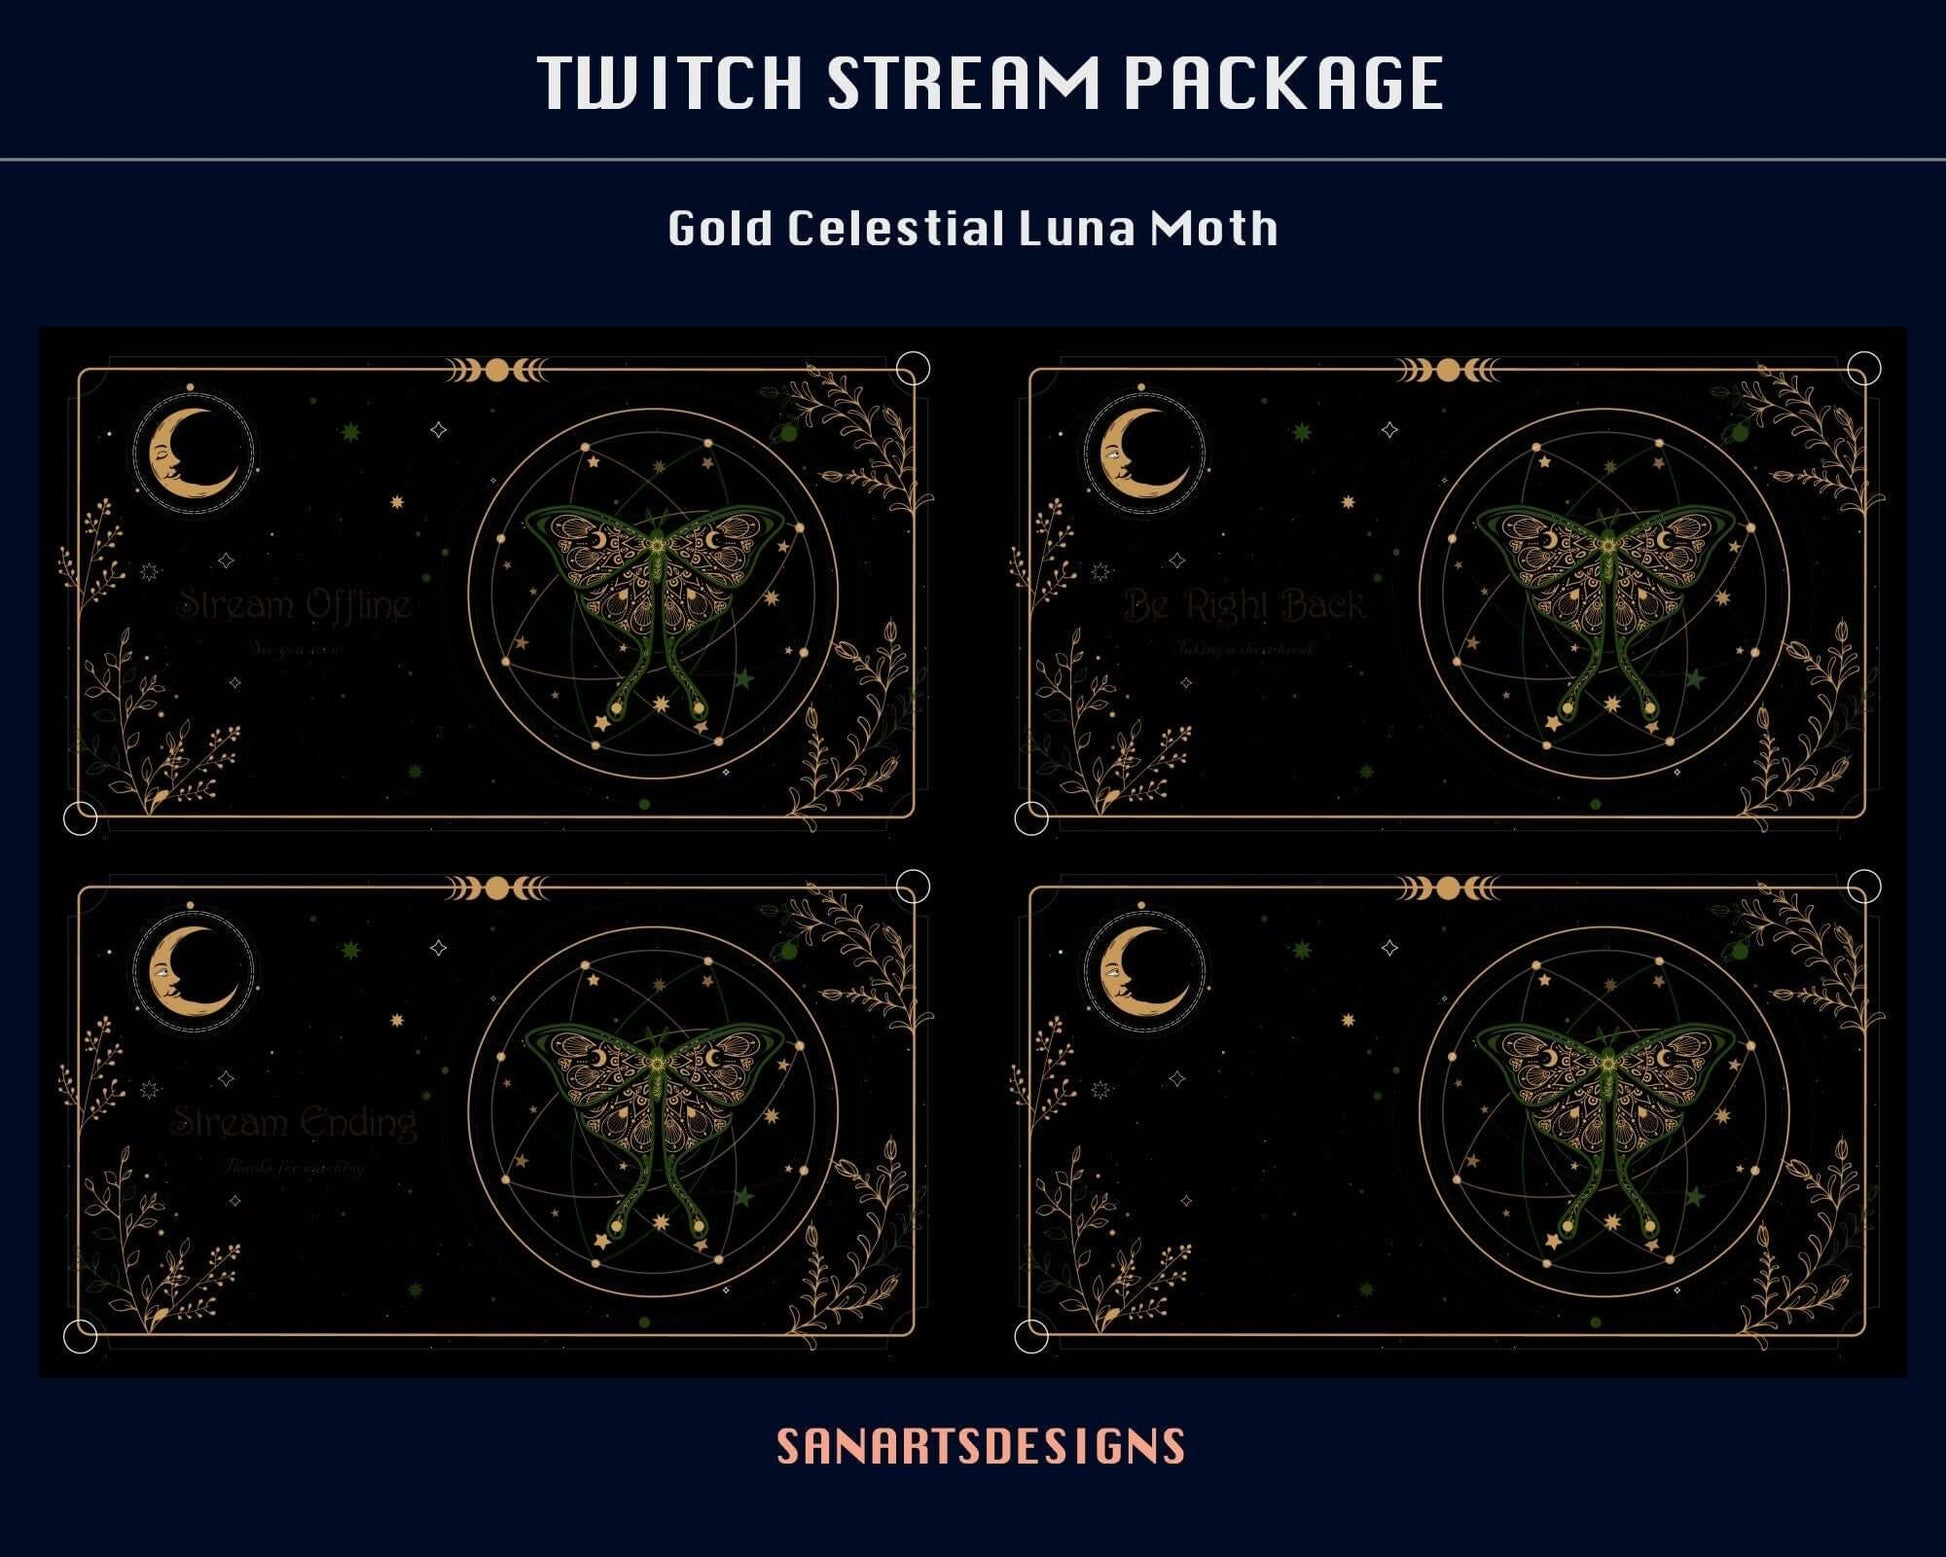 Animated Stream Package GOLD Celestial Luna Moth - Package - Stream K-Arts